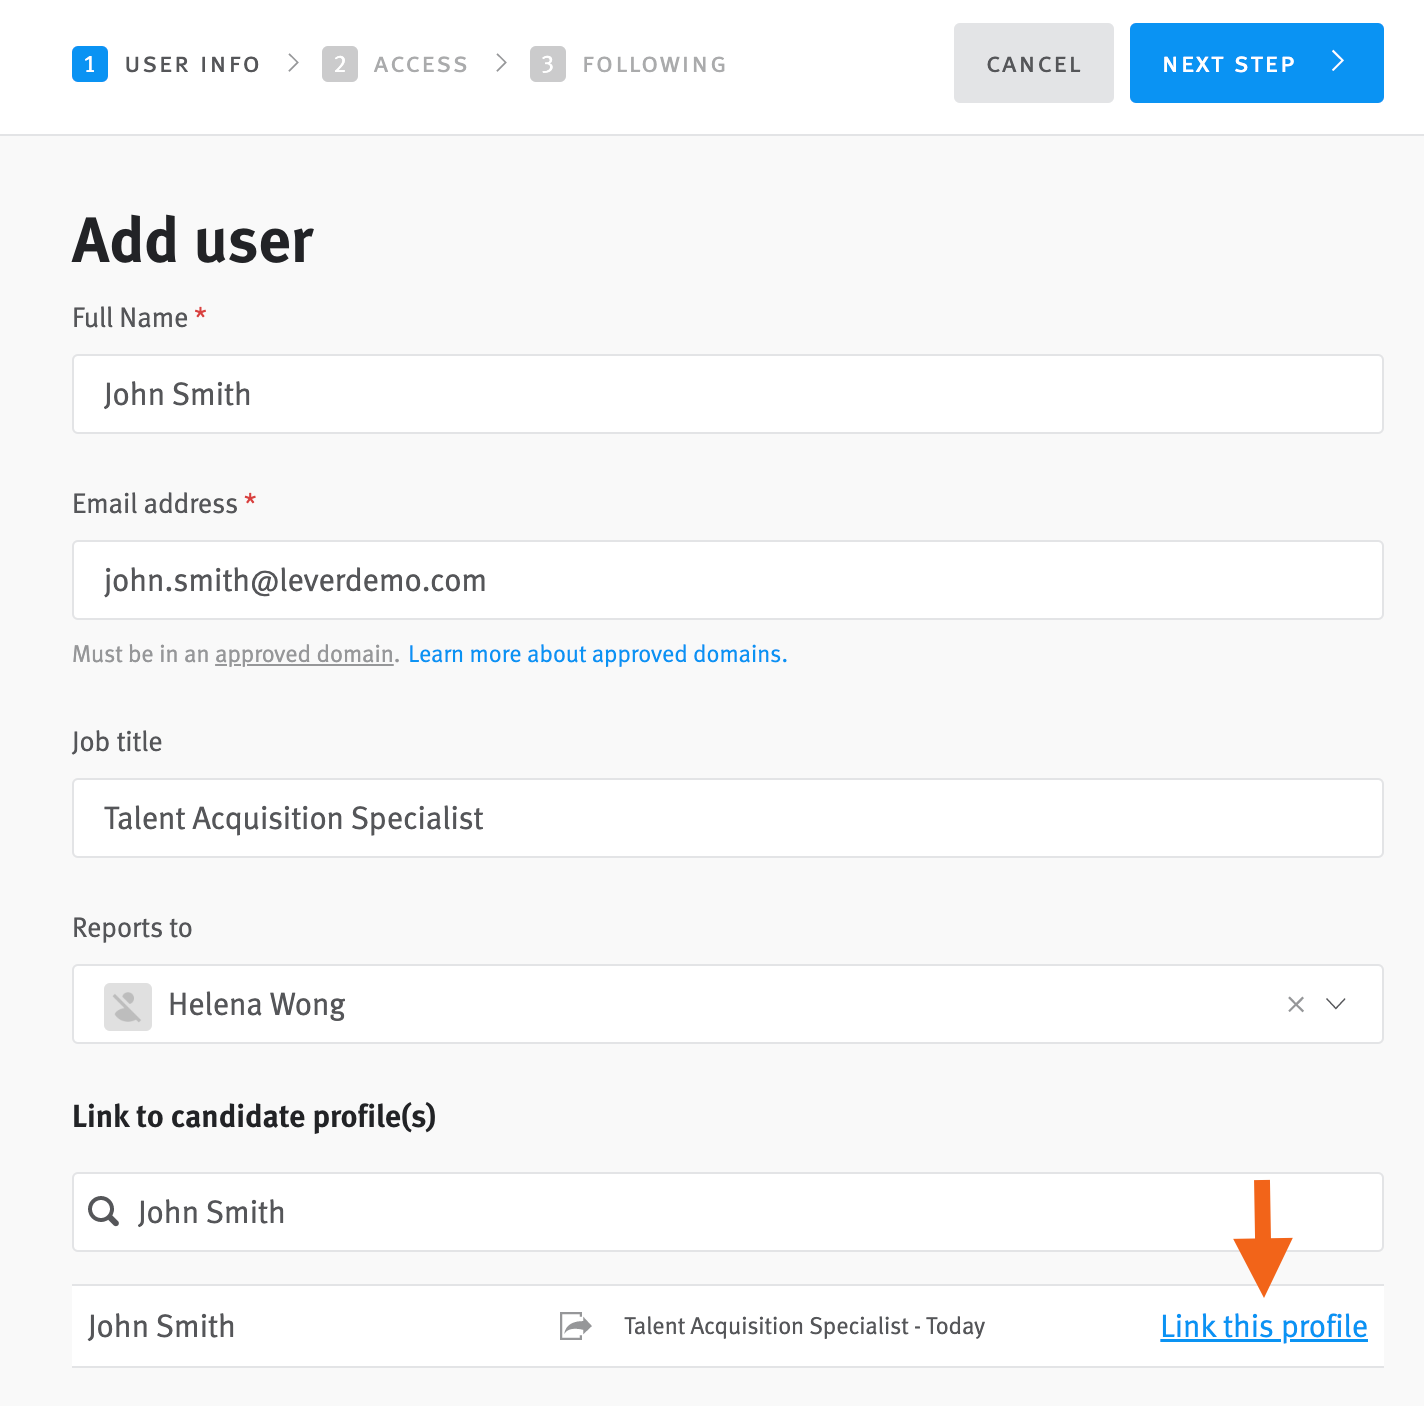 Add new user editor with candidate profile listed and arrow pointing to link this profile button.